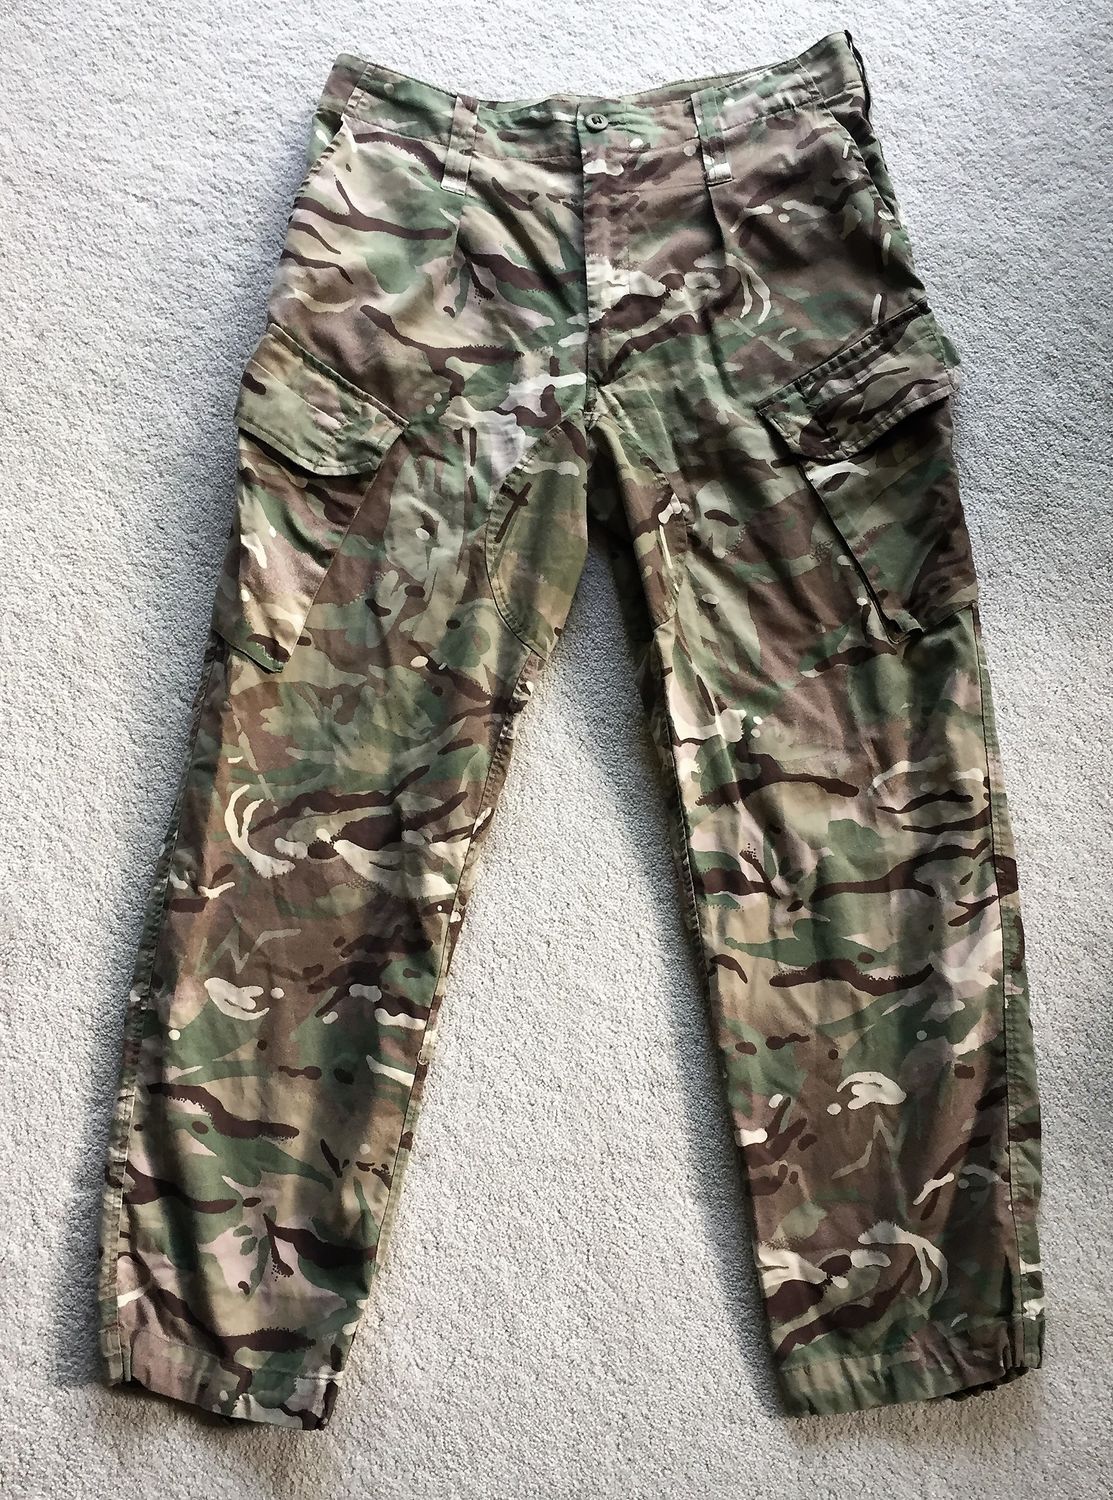 Current MTP Army gear in XL sizes - Gear - Airsoft Forums UK